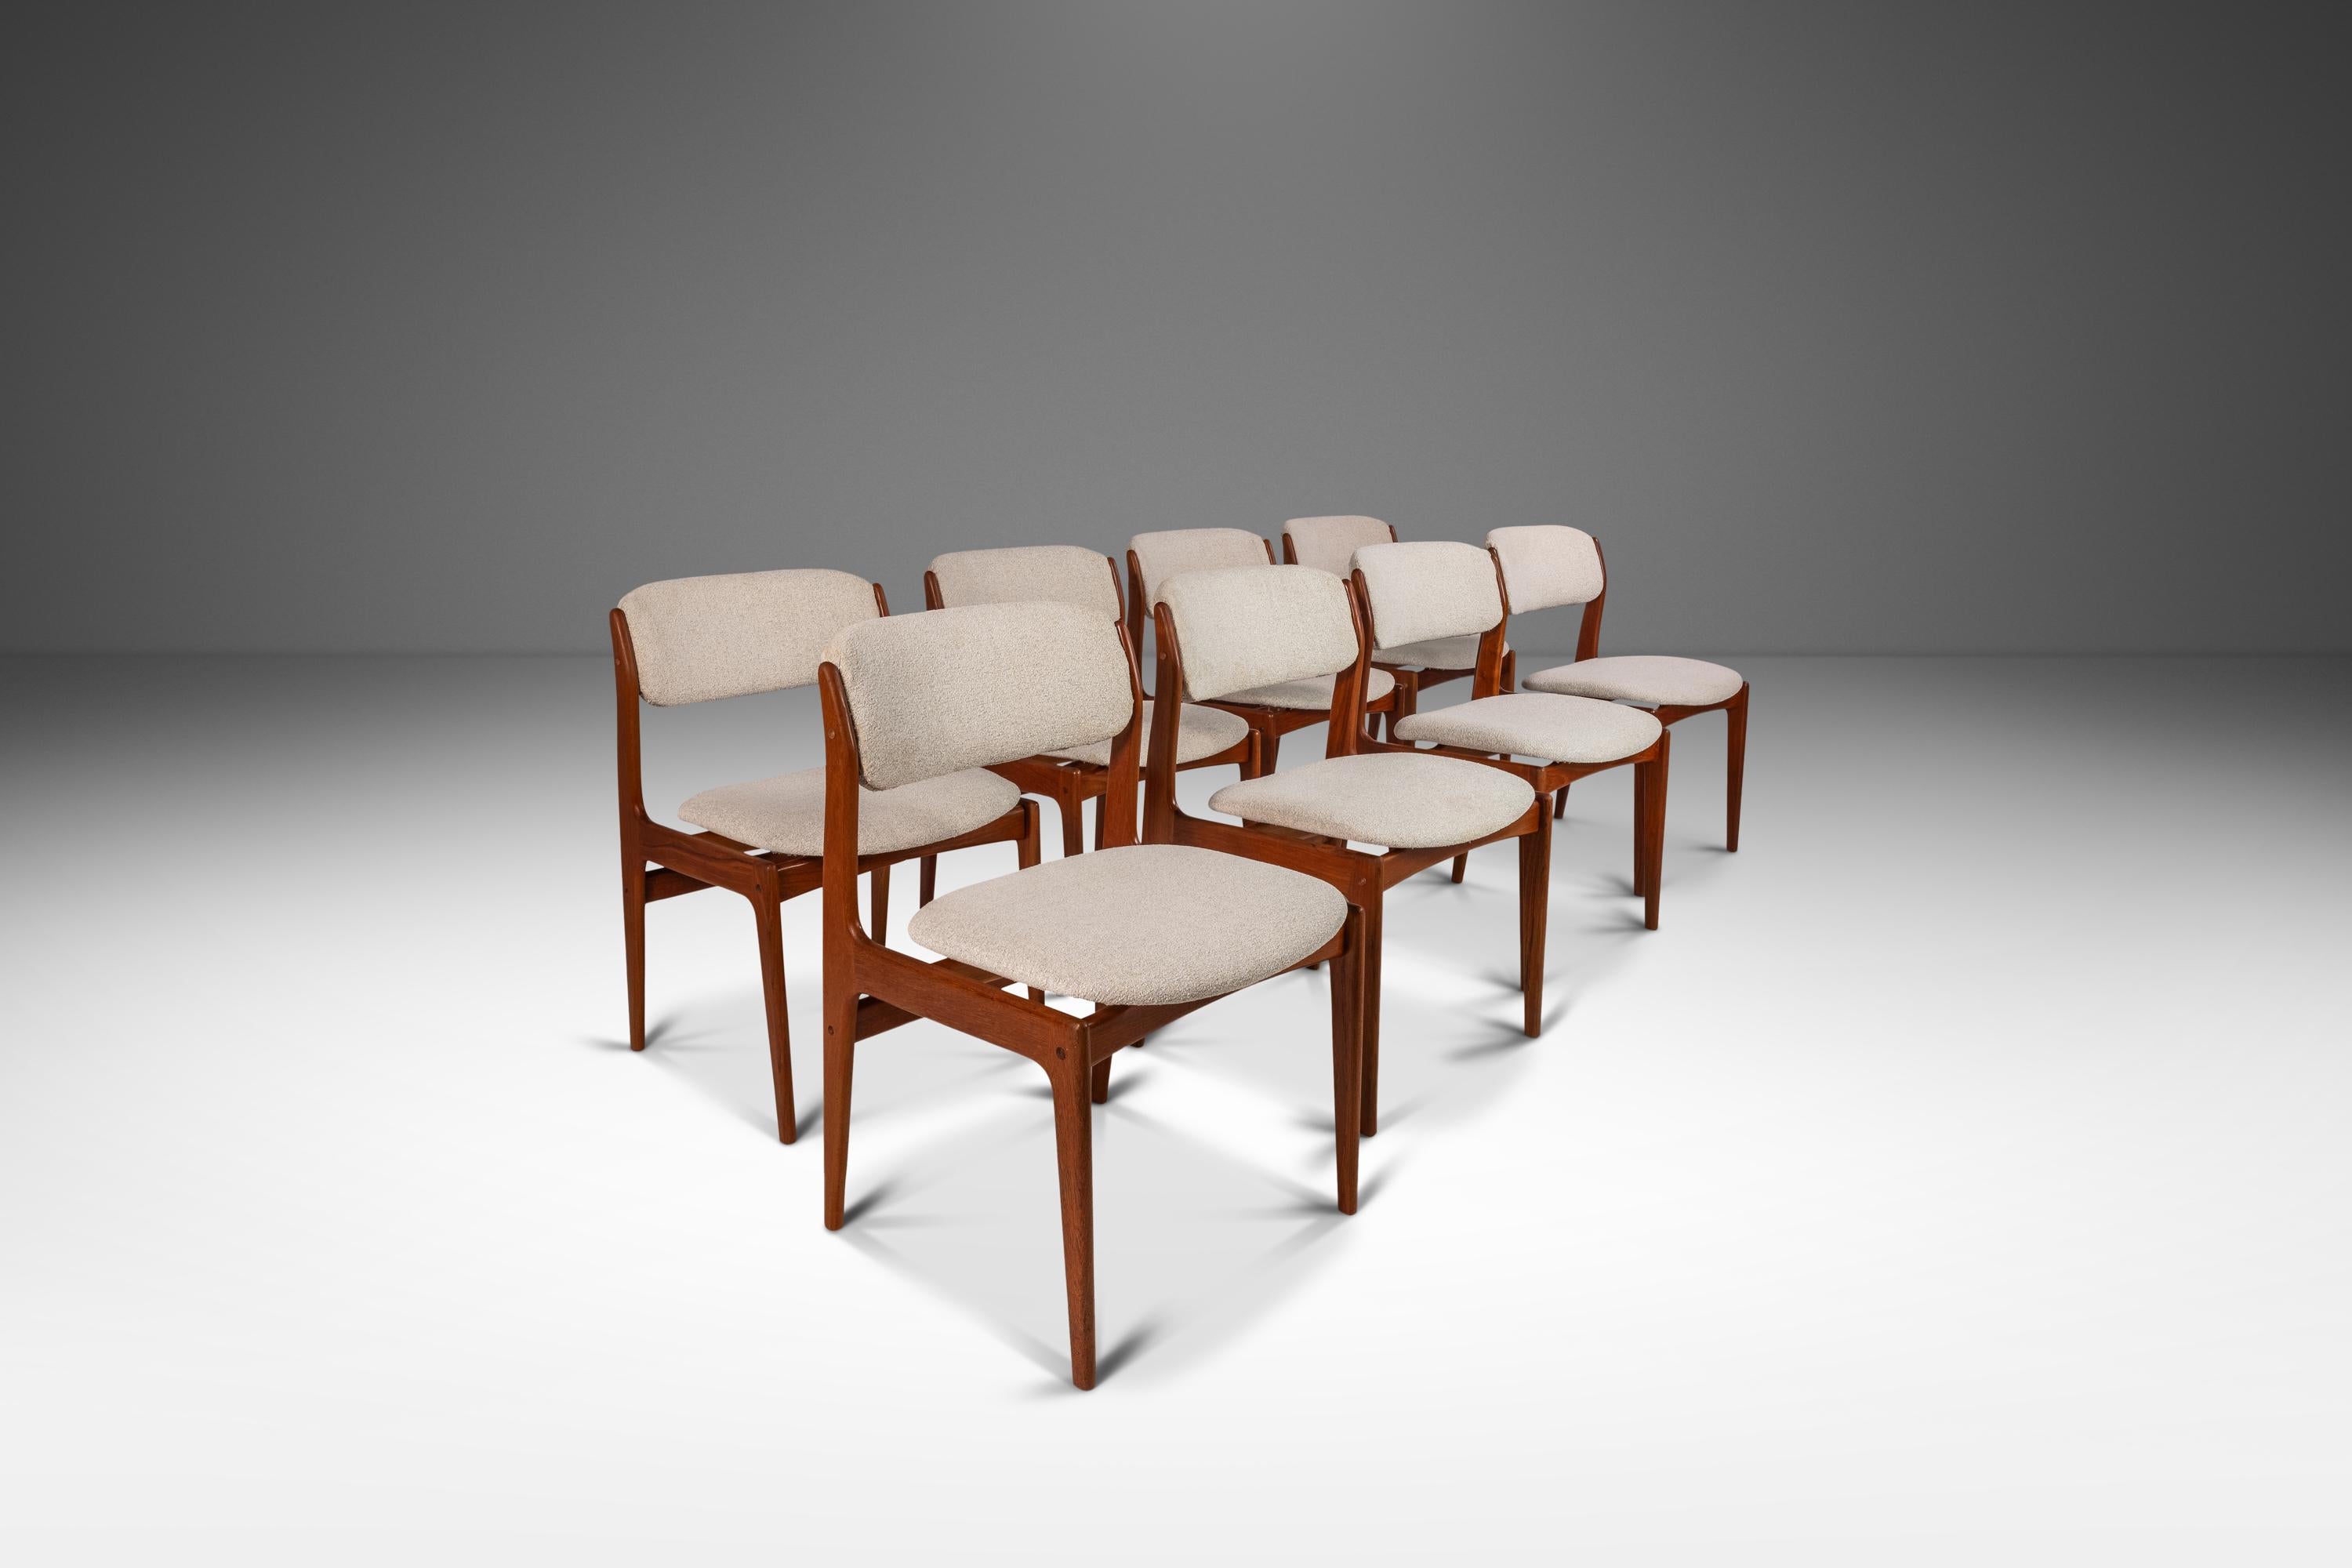 Set of Eight (8) Danish Modern Dining Chairs in Teak by Benny Linden, c. 1970's 4